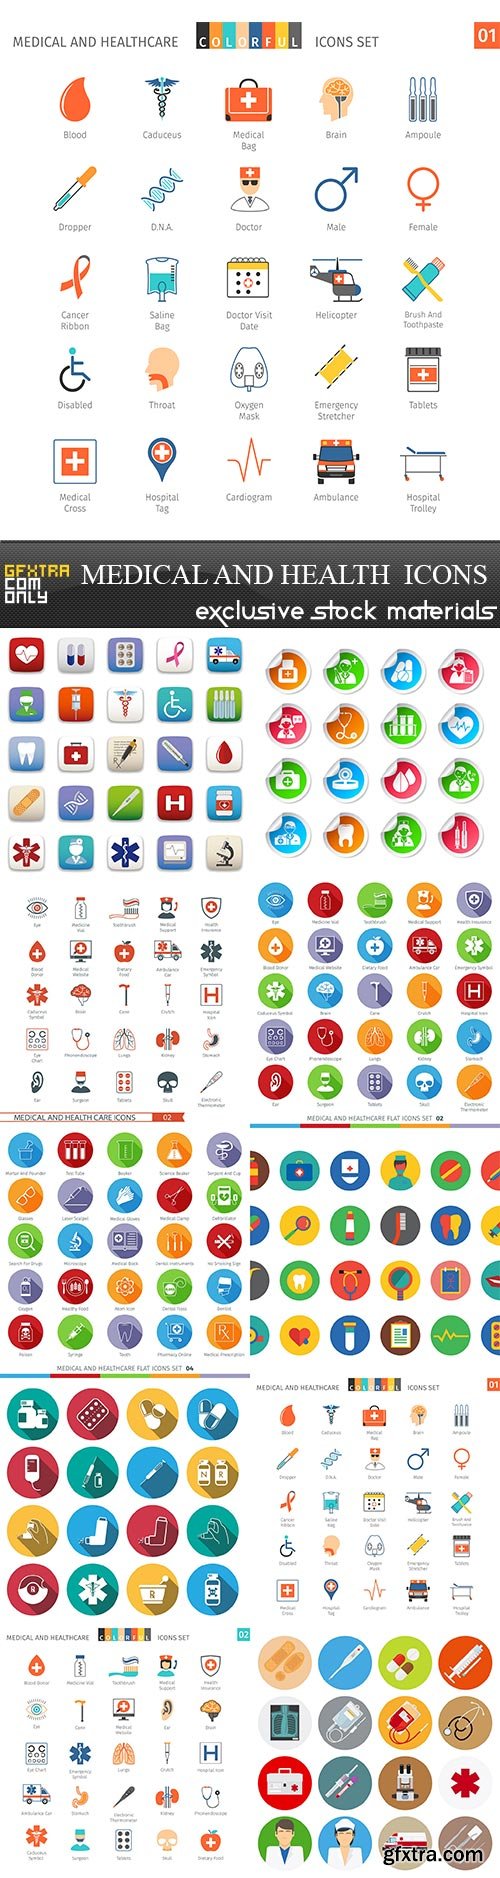 Medical and Health Icons, 10 x EPS